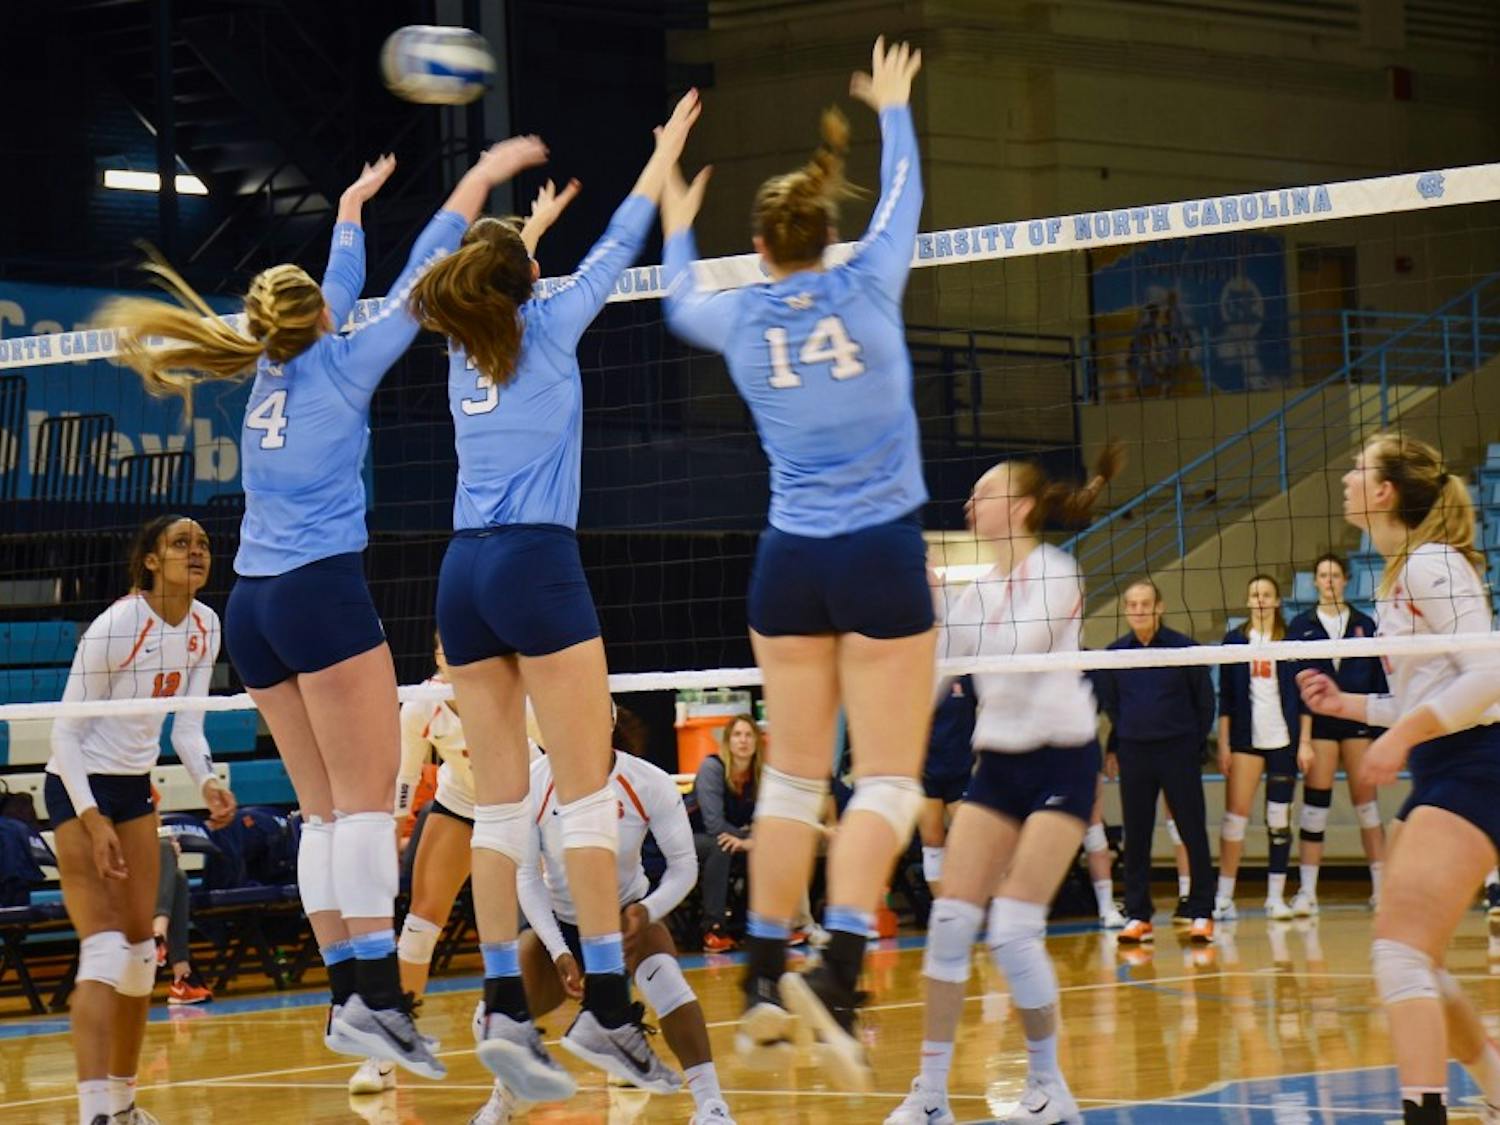 North Carolina hitters Taylor Borup (4), Beth Nordhorn (3) and Madison Laufenberg (14) elevate for a block against Syracuse on Sunday afternoon in Carmichael Arena.